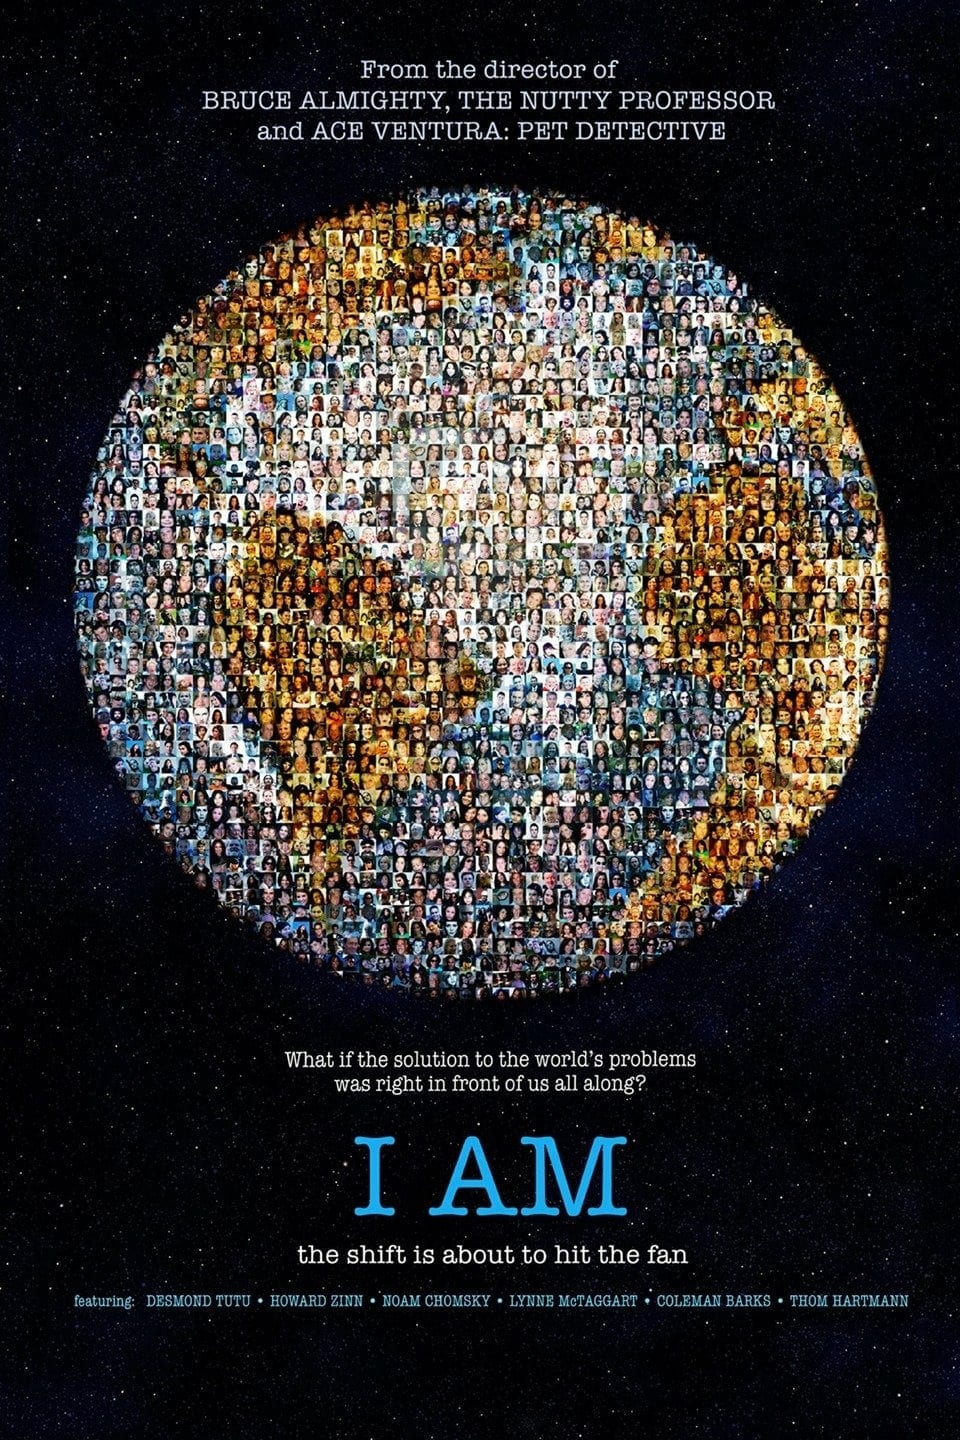 Poster for the movie "I Am"